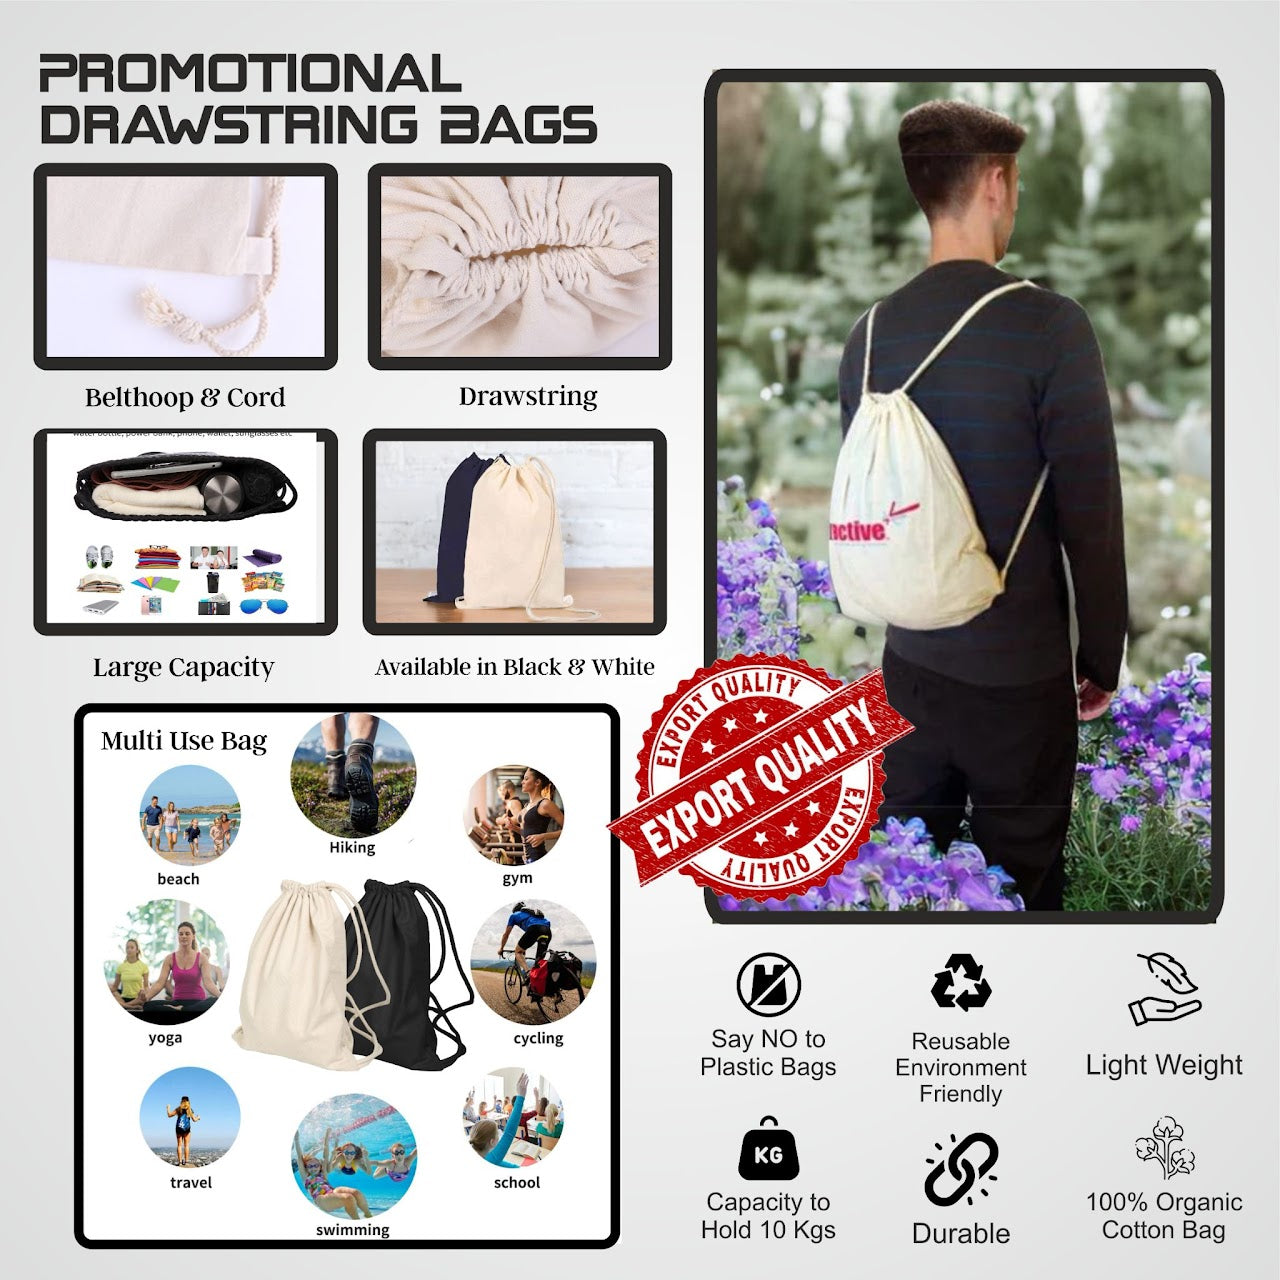 Personalized Black Promotional Drawstring Bag - For Corporate Gifting, Event or Exhibition Freebies, Promotions